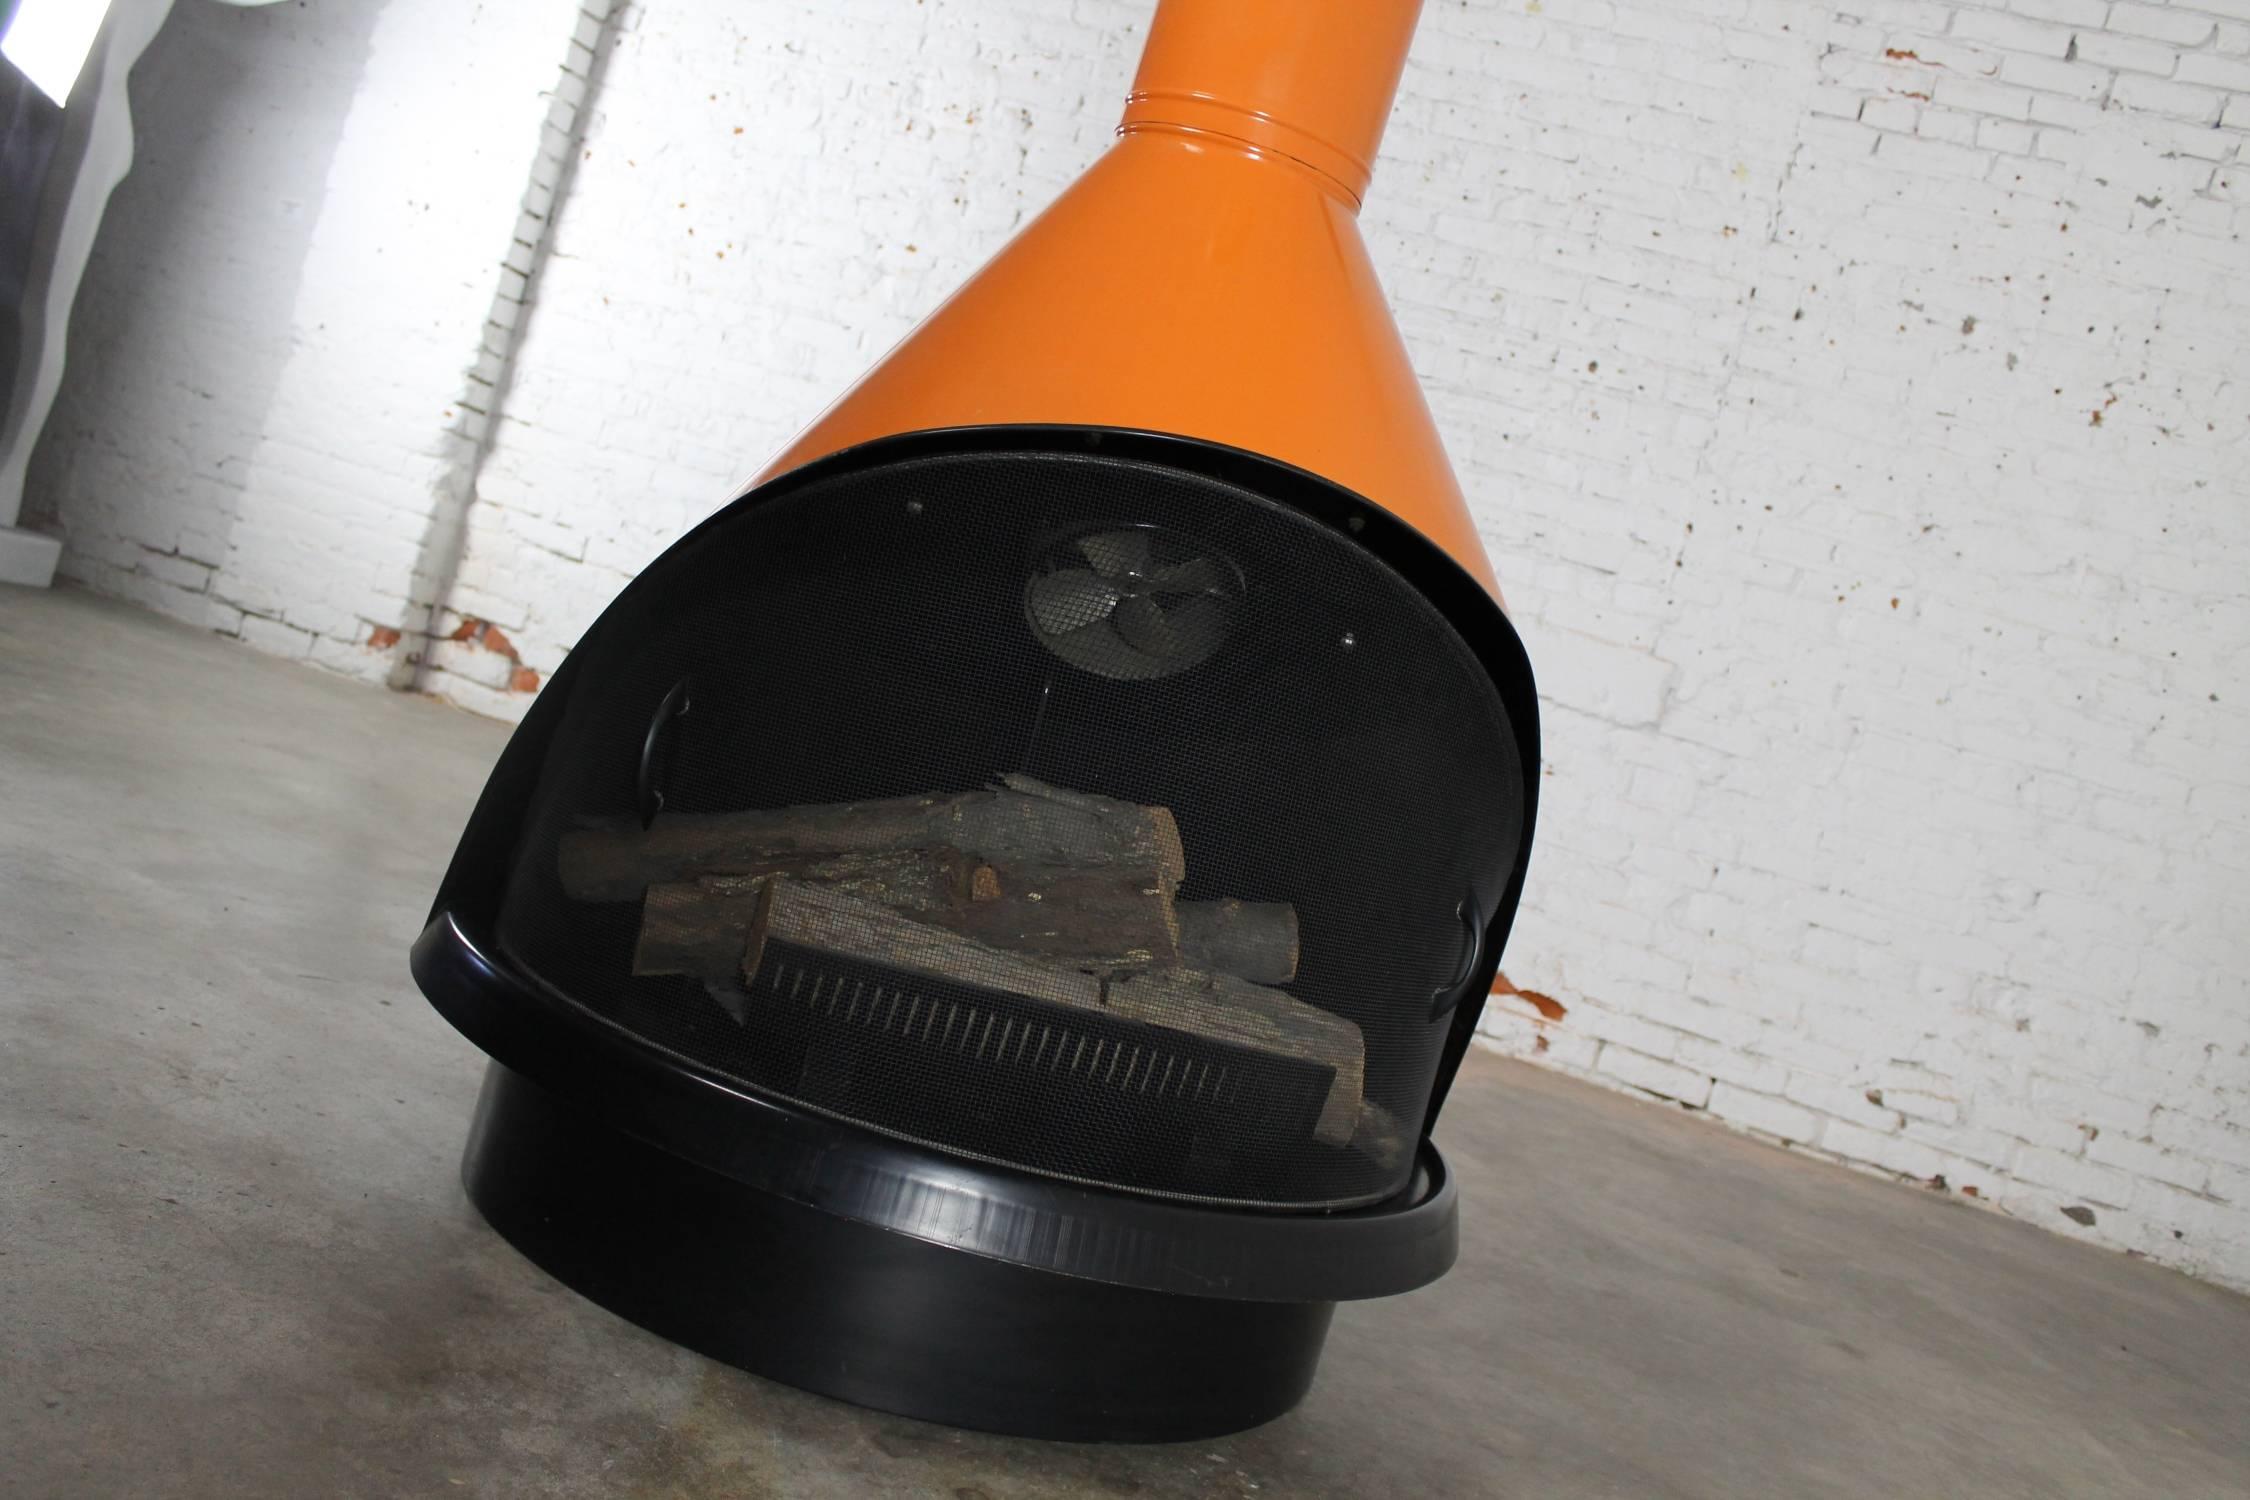 Incredible vintage retro mod Mid-Century Modern working fully electric faux fireplace in the style of Wendell Lovett, Preway, or Malm. Bright orange with black accents and sold by Sears. It is in wonderful vintage condition.

OMG!!! This retro